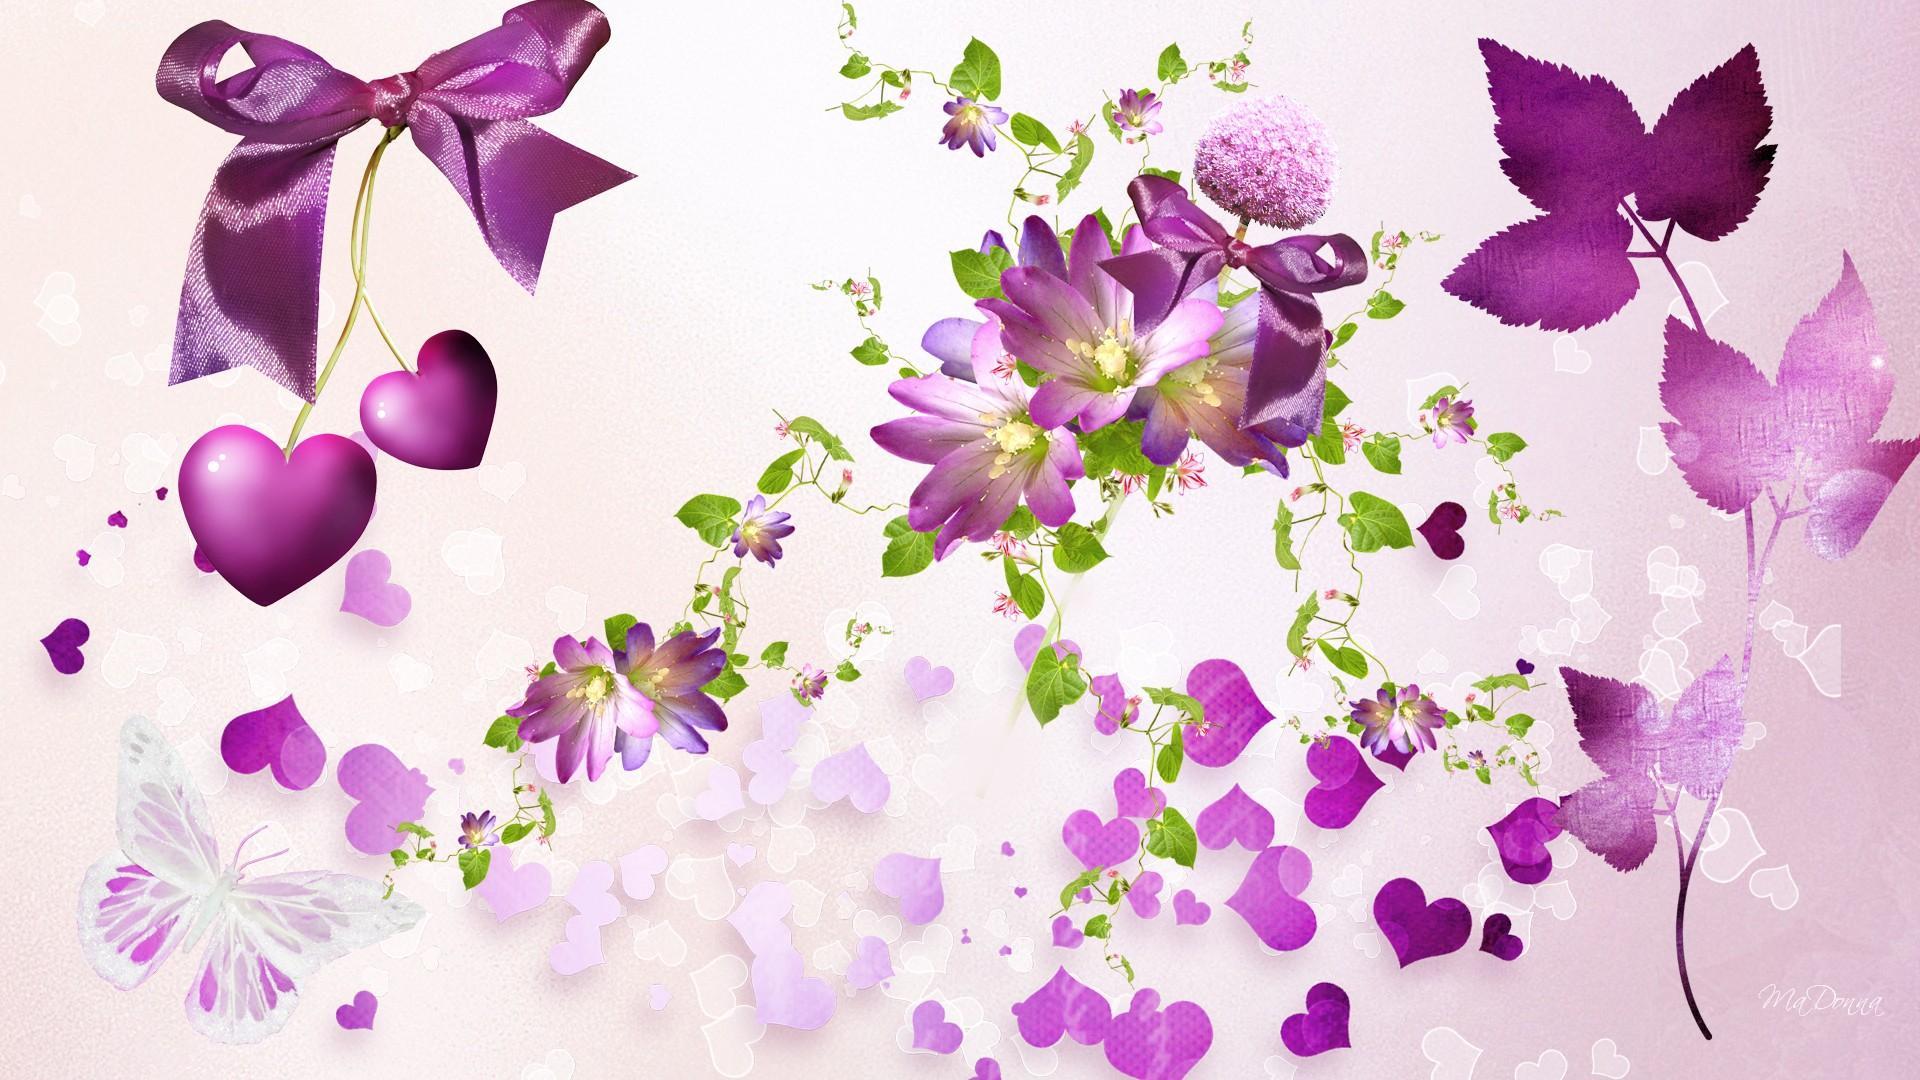 hearts and flowers wallpaper